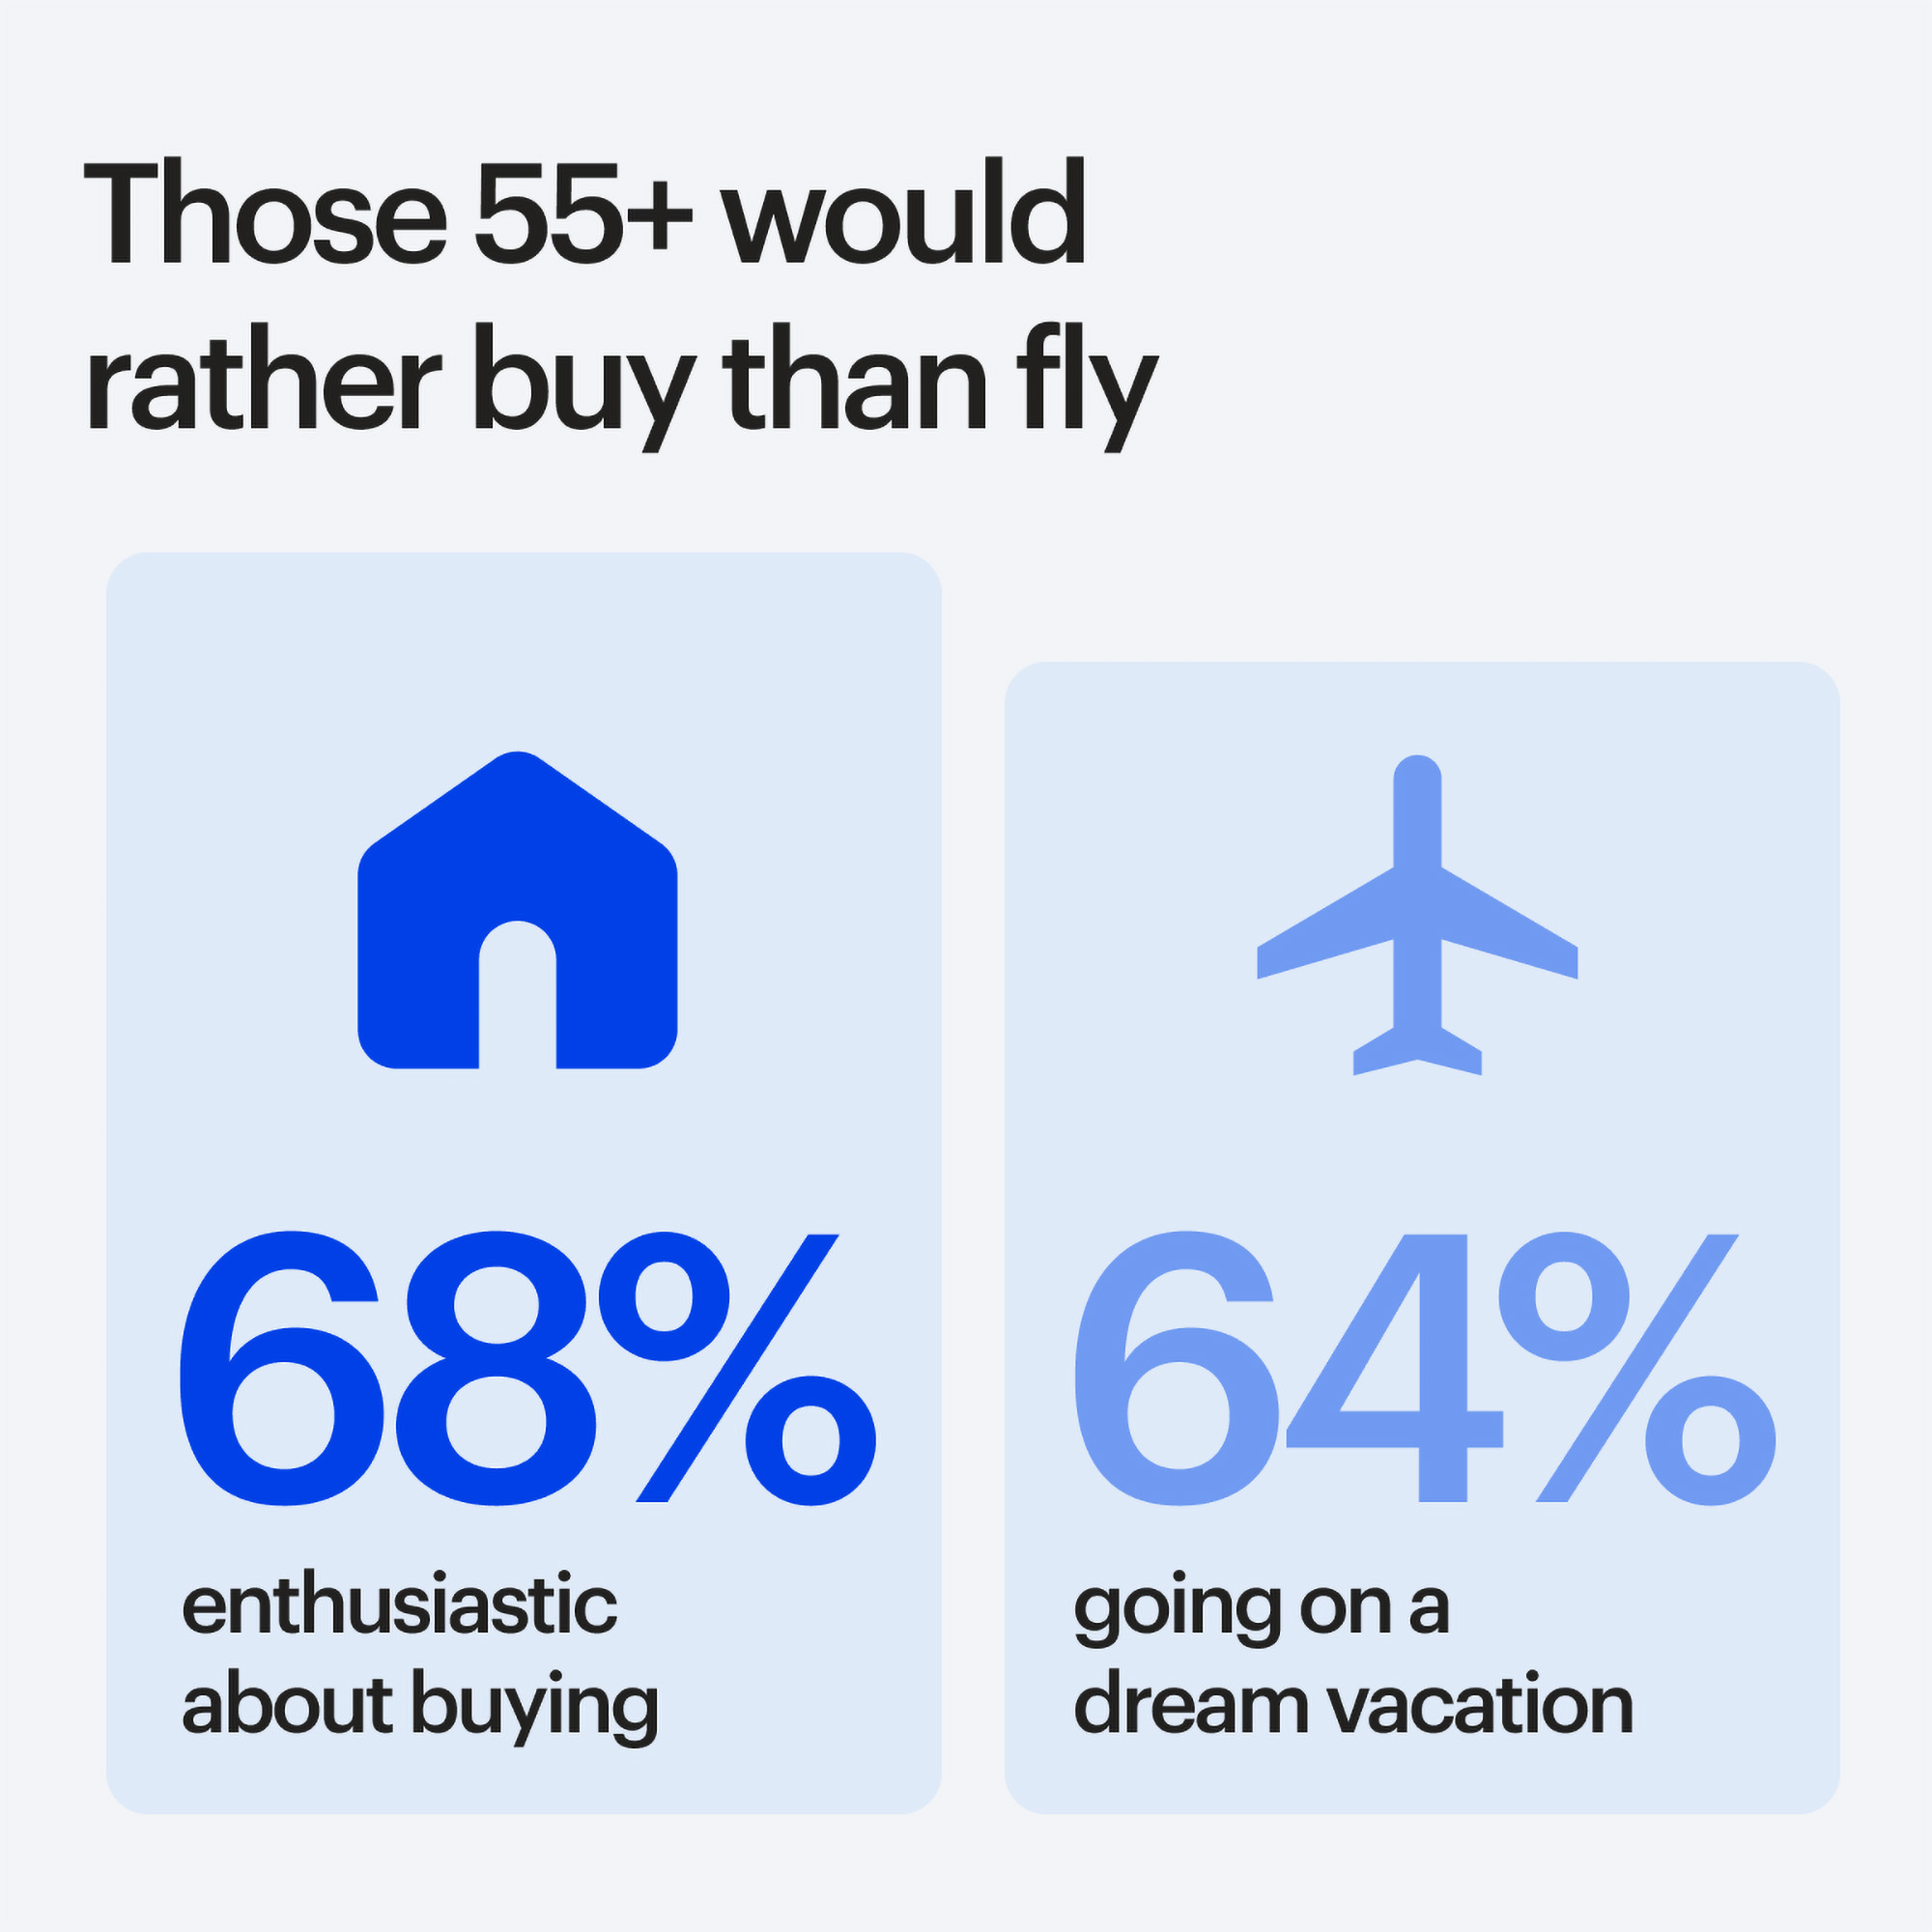 Over two-thirds (68%) says they’re most enthusiastic about buying a home, with traveling to a dream vacation (64%)